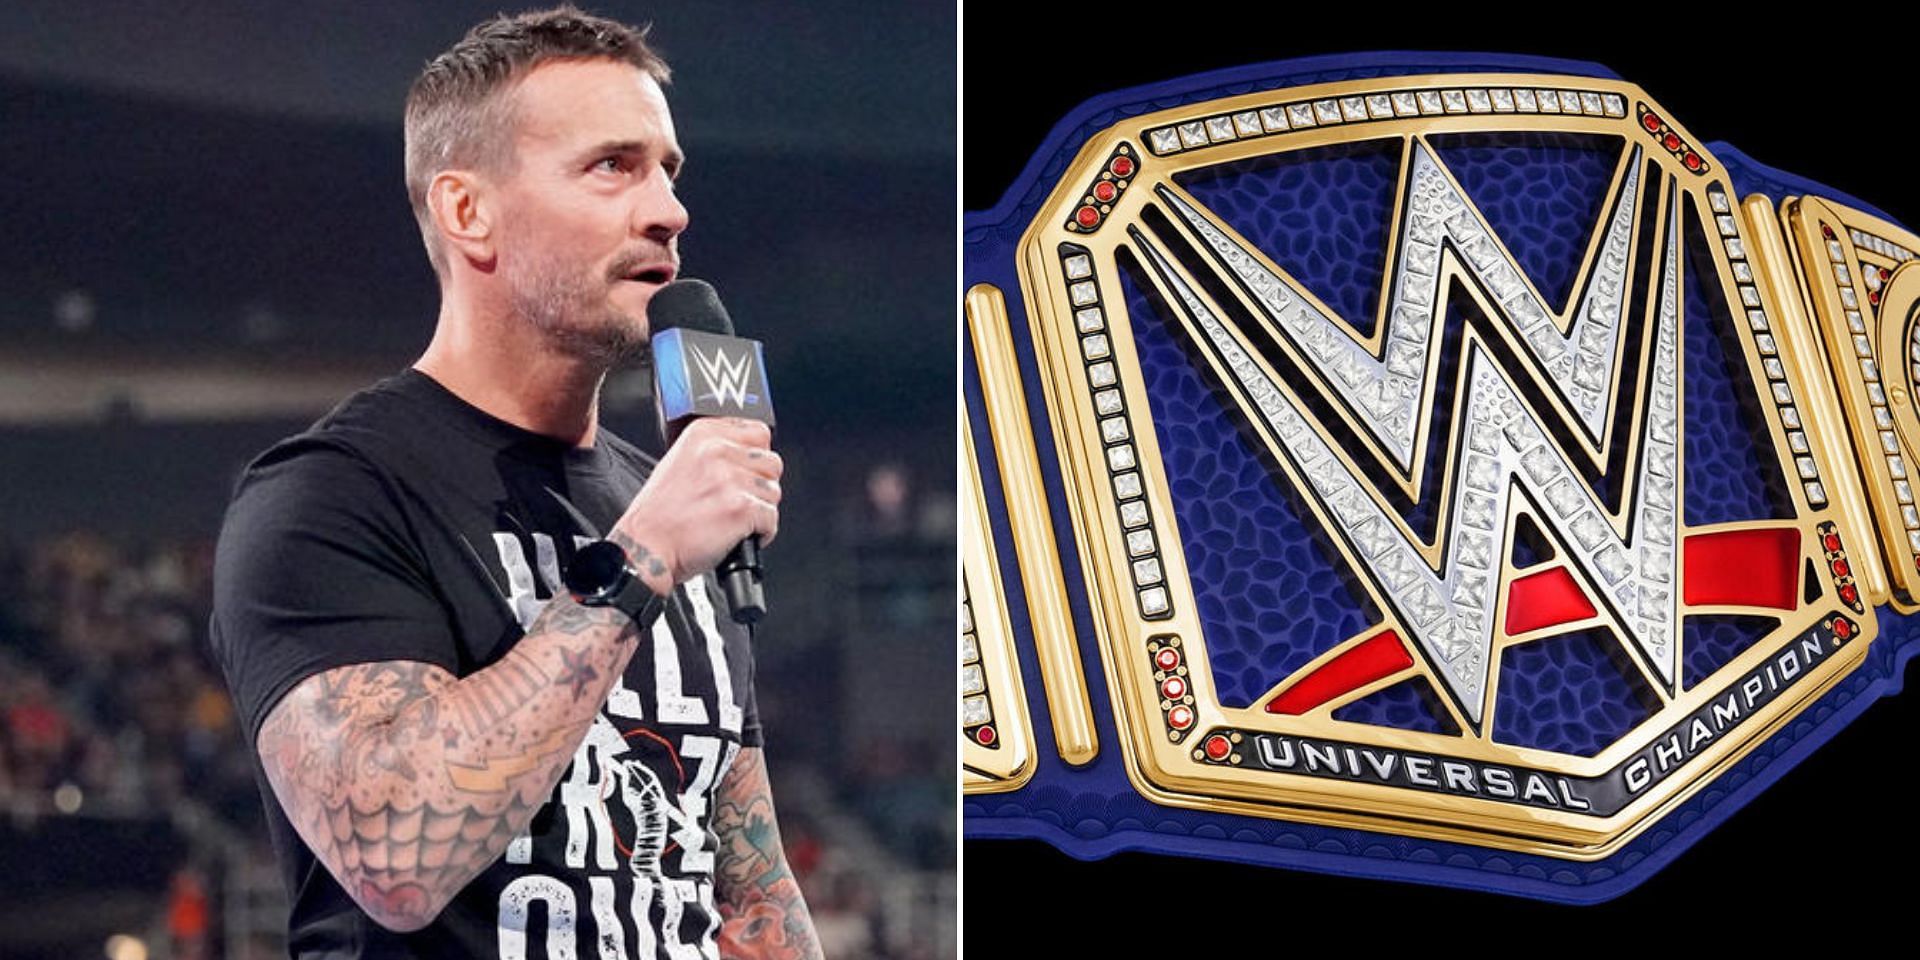 A former world champion has commented on possibly feuding with CM Punk